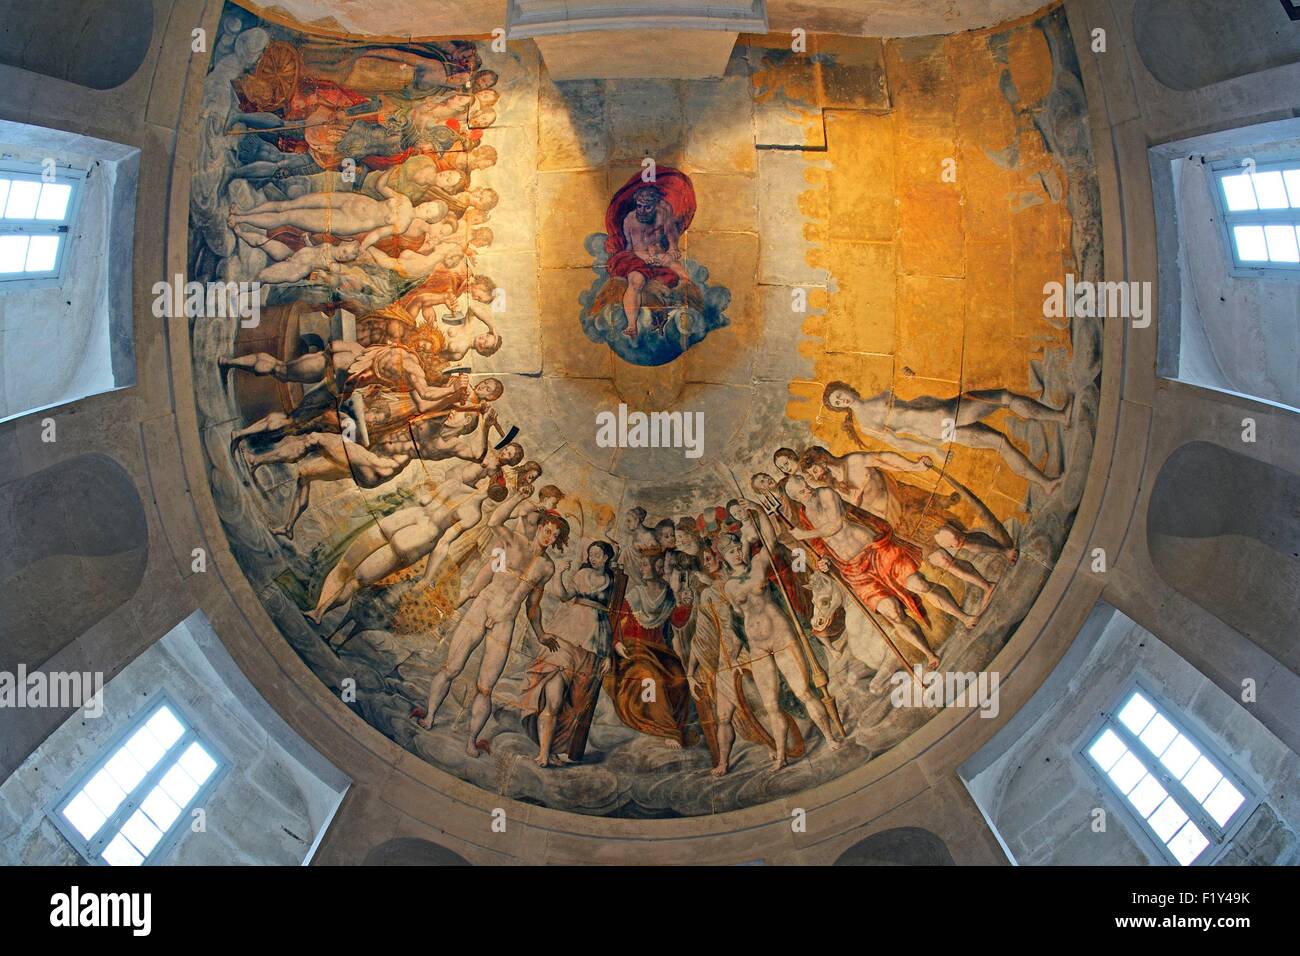 France, Yonne, Tanlay, castle of Tanlay, the cupola of the Ligue's tower with its fresco depicting some protestant and catholic dignitaries as mythological divinities Stock Photo